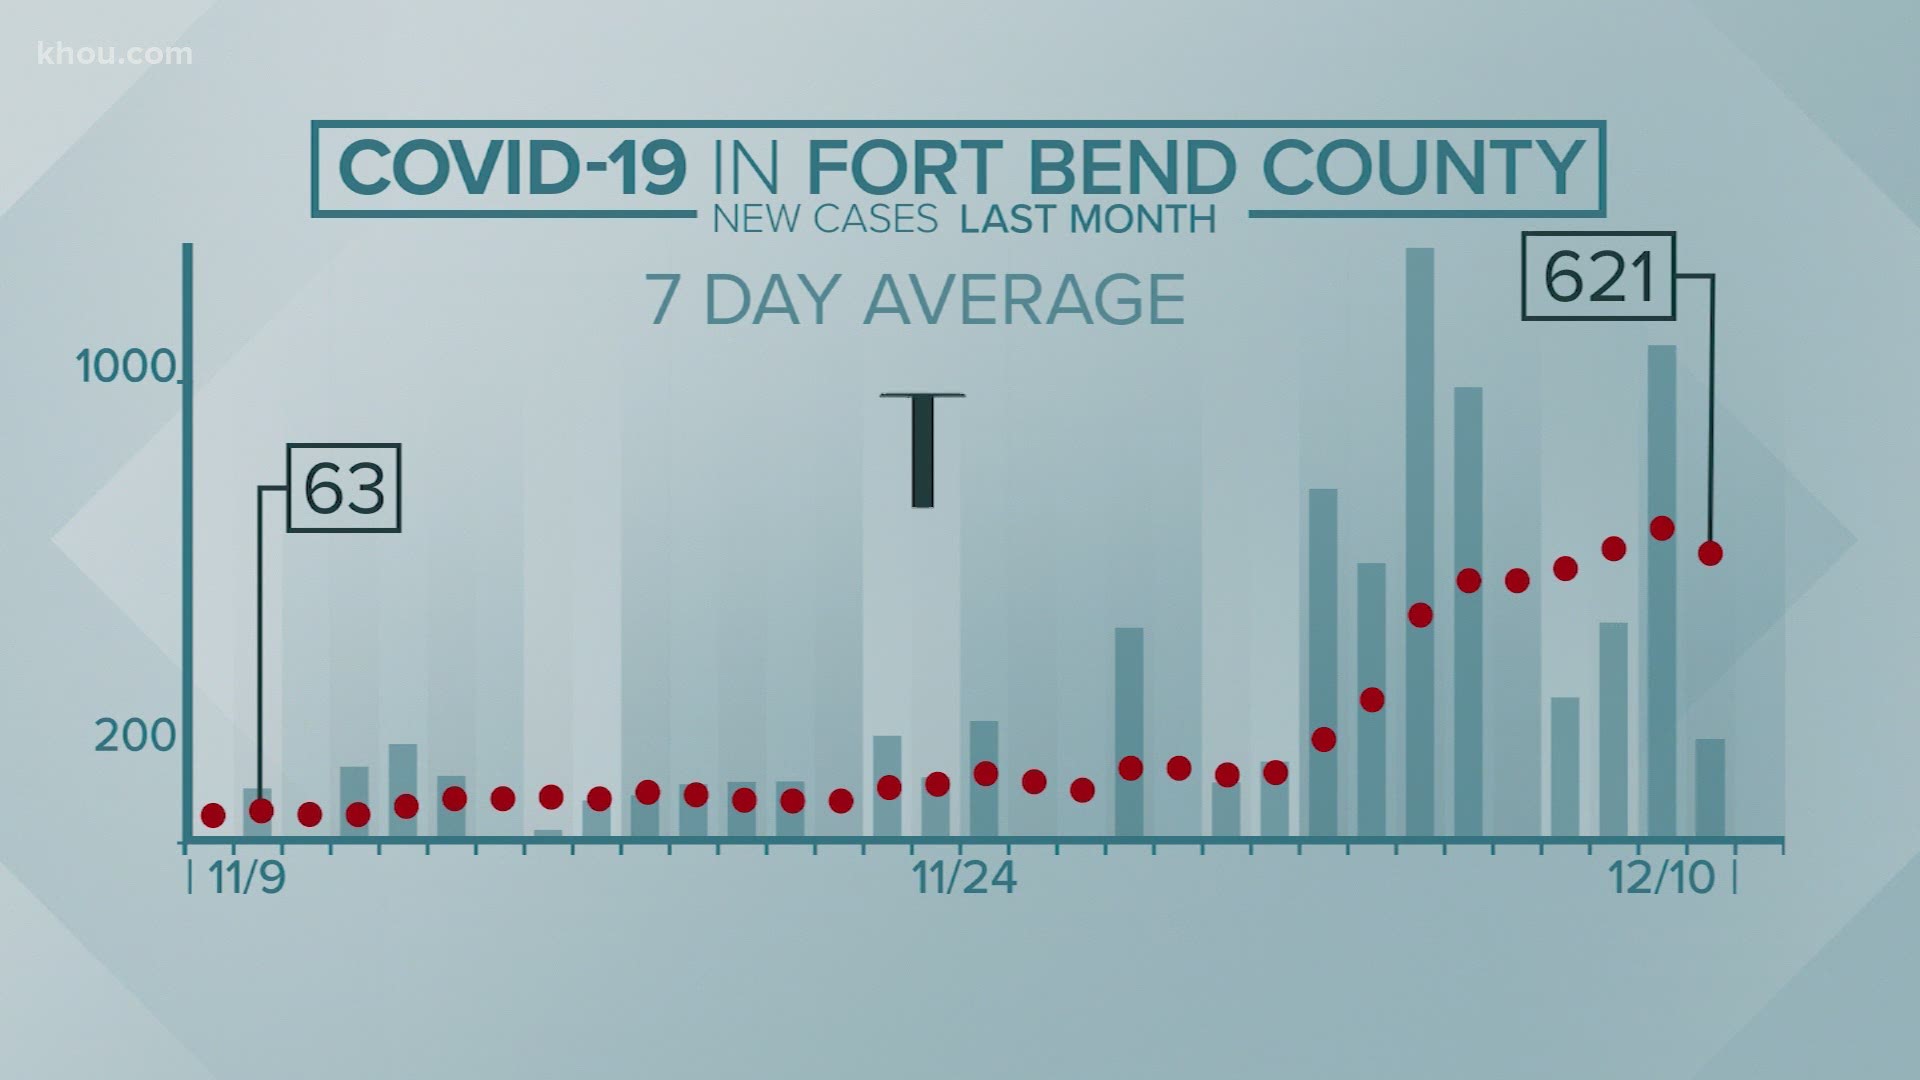 New daily COVID-19 cases have doubled, tripled or more in that time for several Houston-area counties, according to a KHOU 11 analysis.